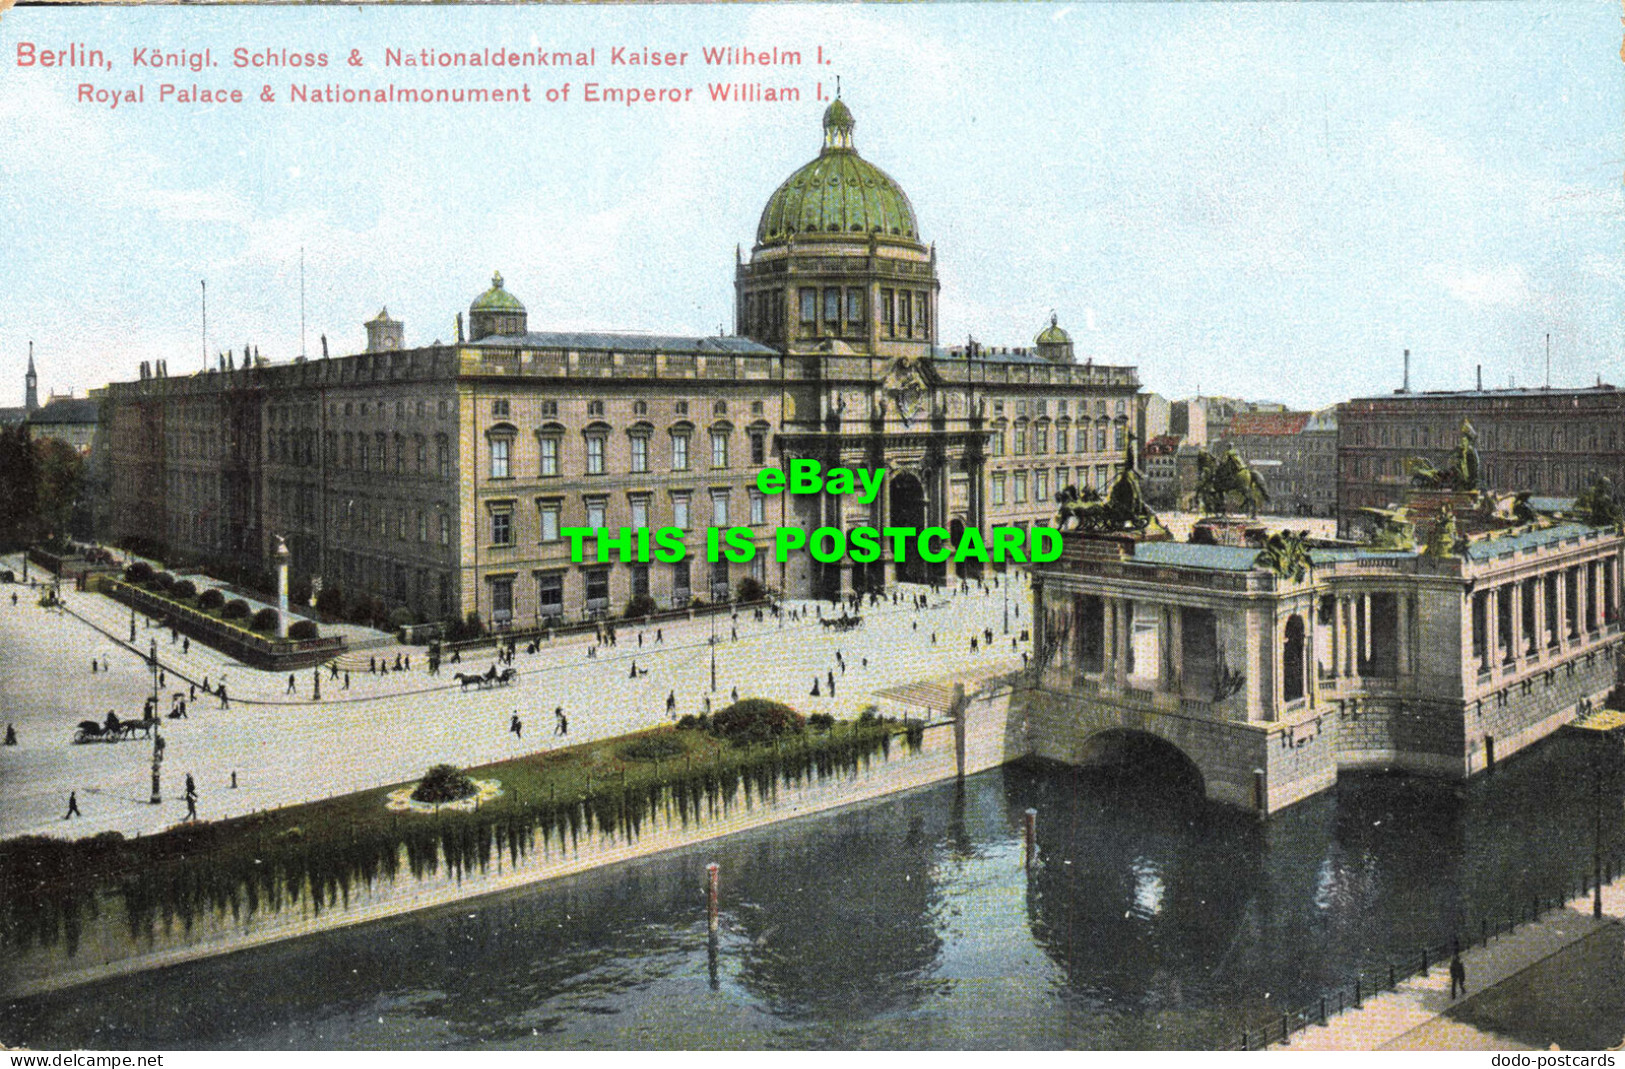 R587866 Berlin. Royal Palace And Nationalmonument Of Emperor William I - Welt